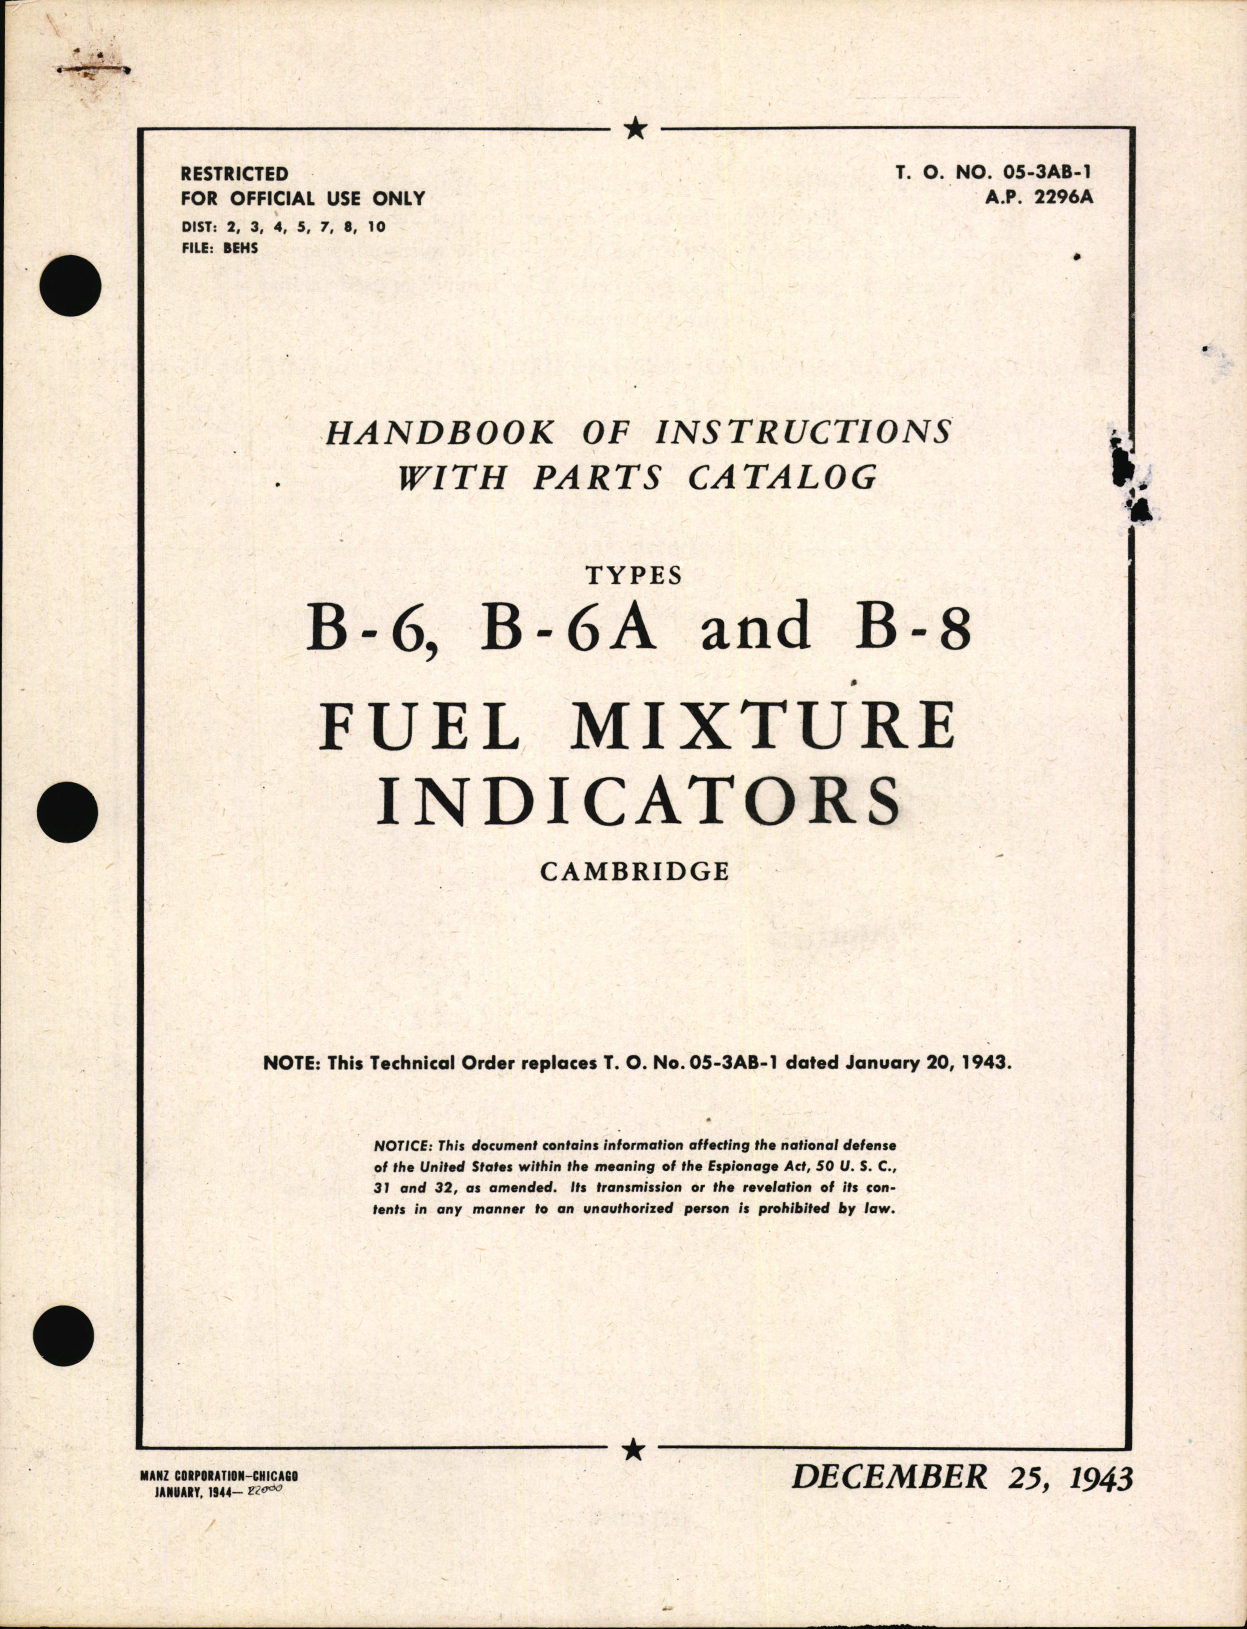 Sample page 1 from AirCorps Library document: Handbook of Instructions with Parts Catalog for Fuel Mixture Indicators